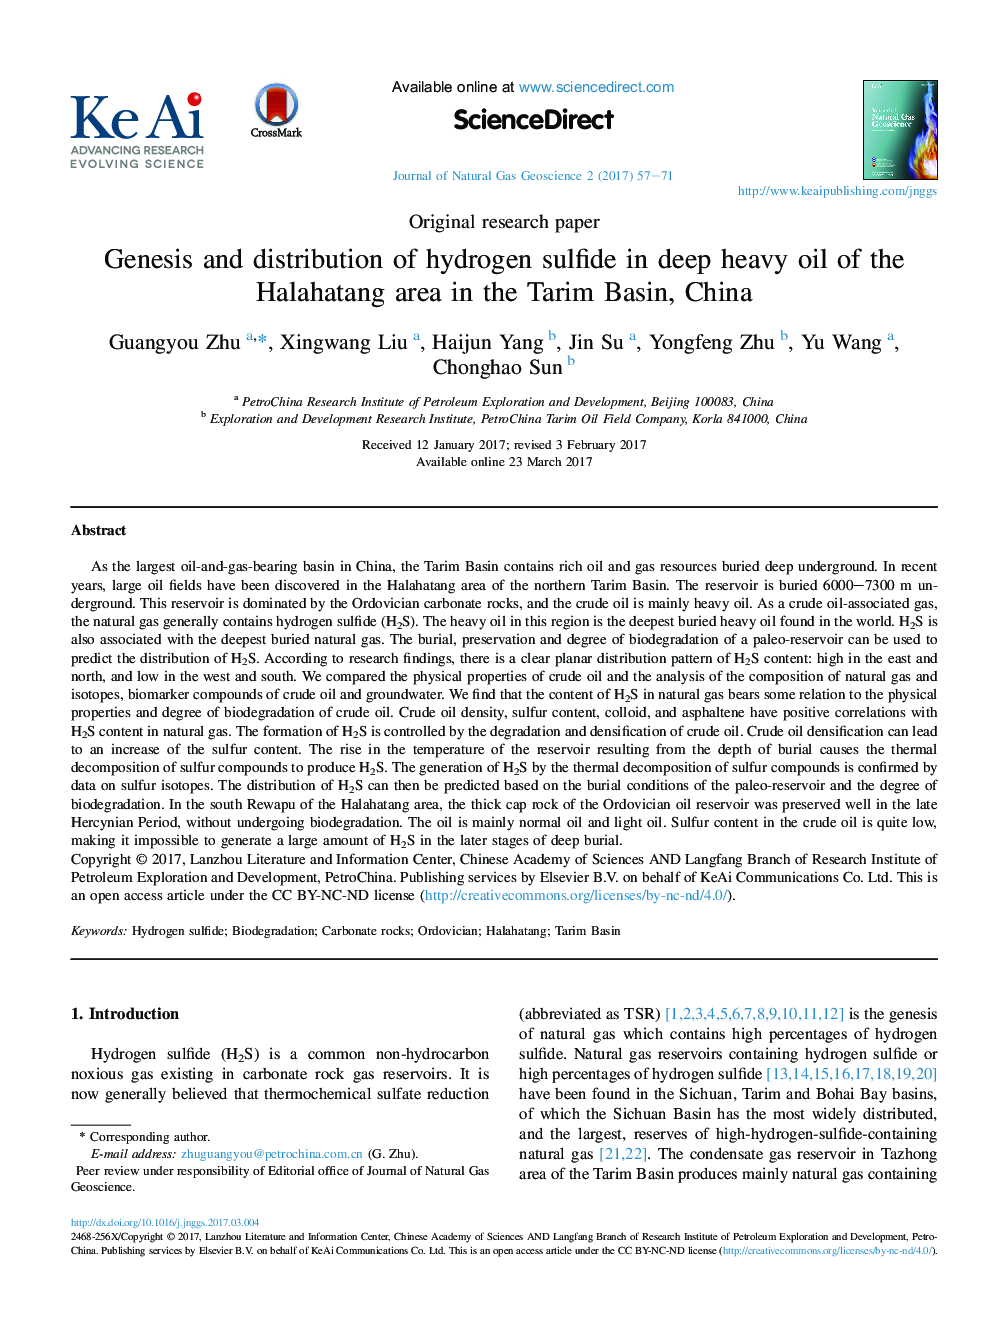 Genesis and distribution of hydrogen sulfide in deep heavy oil of the Halahatang area in the Tarim Basin, China